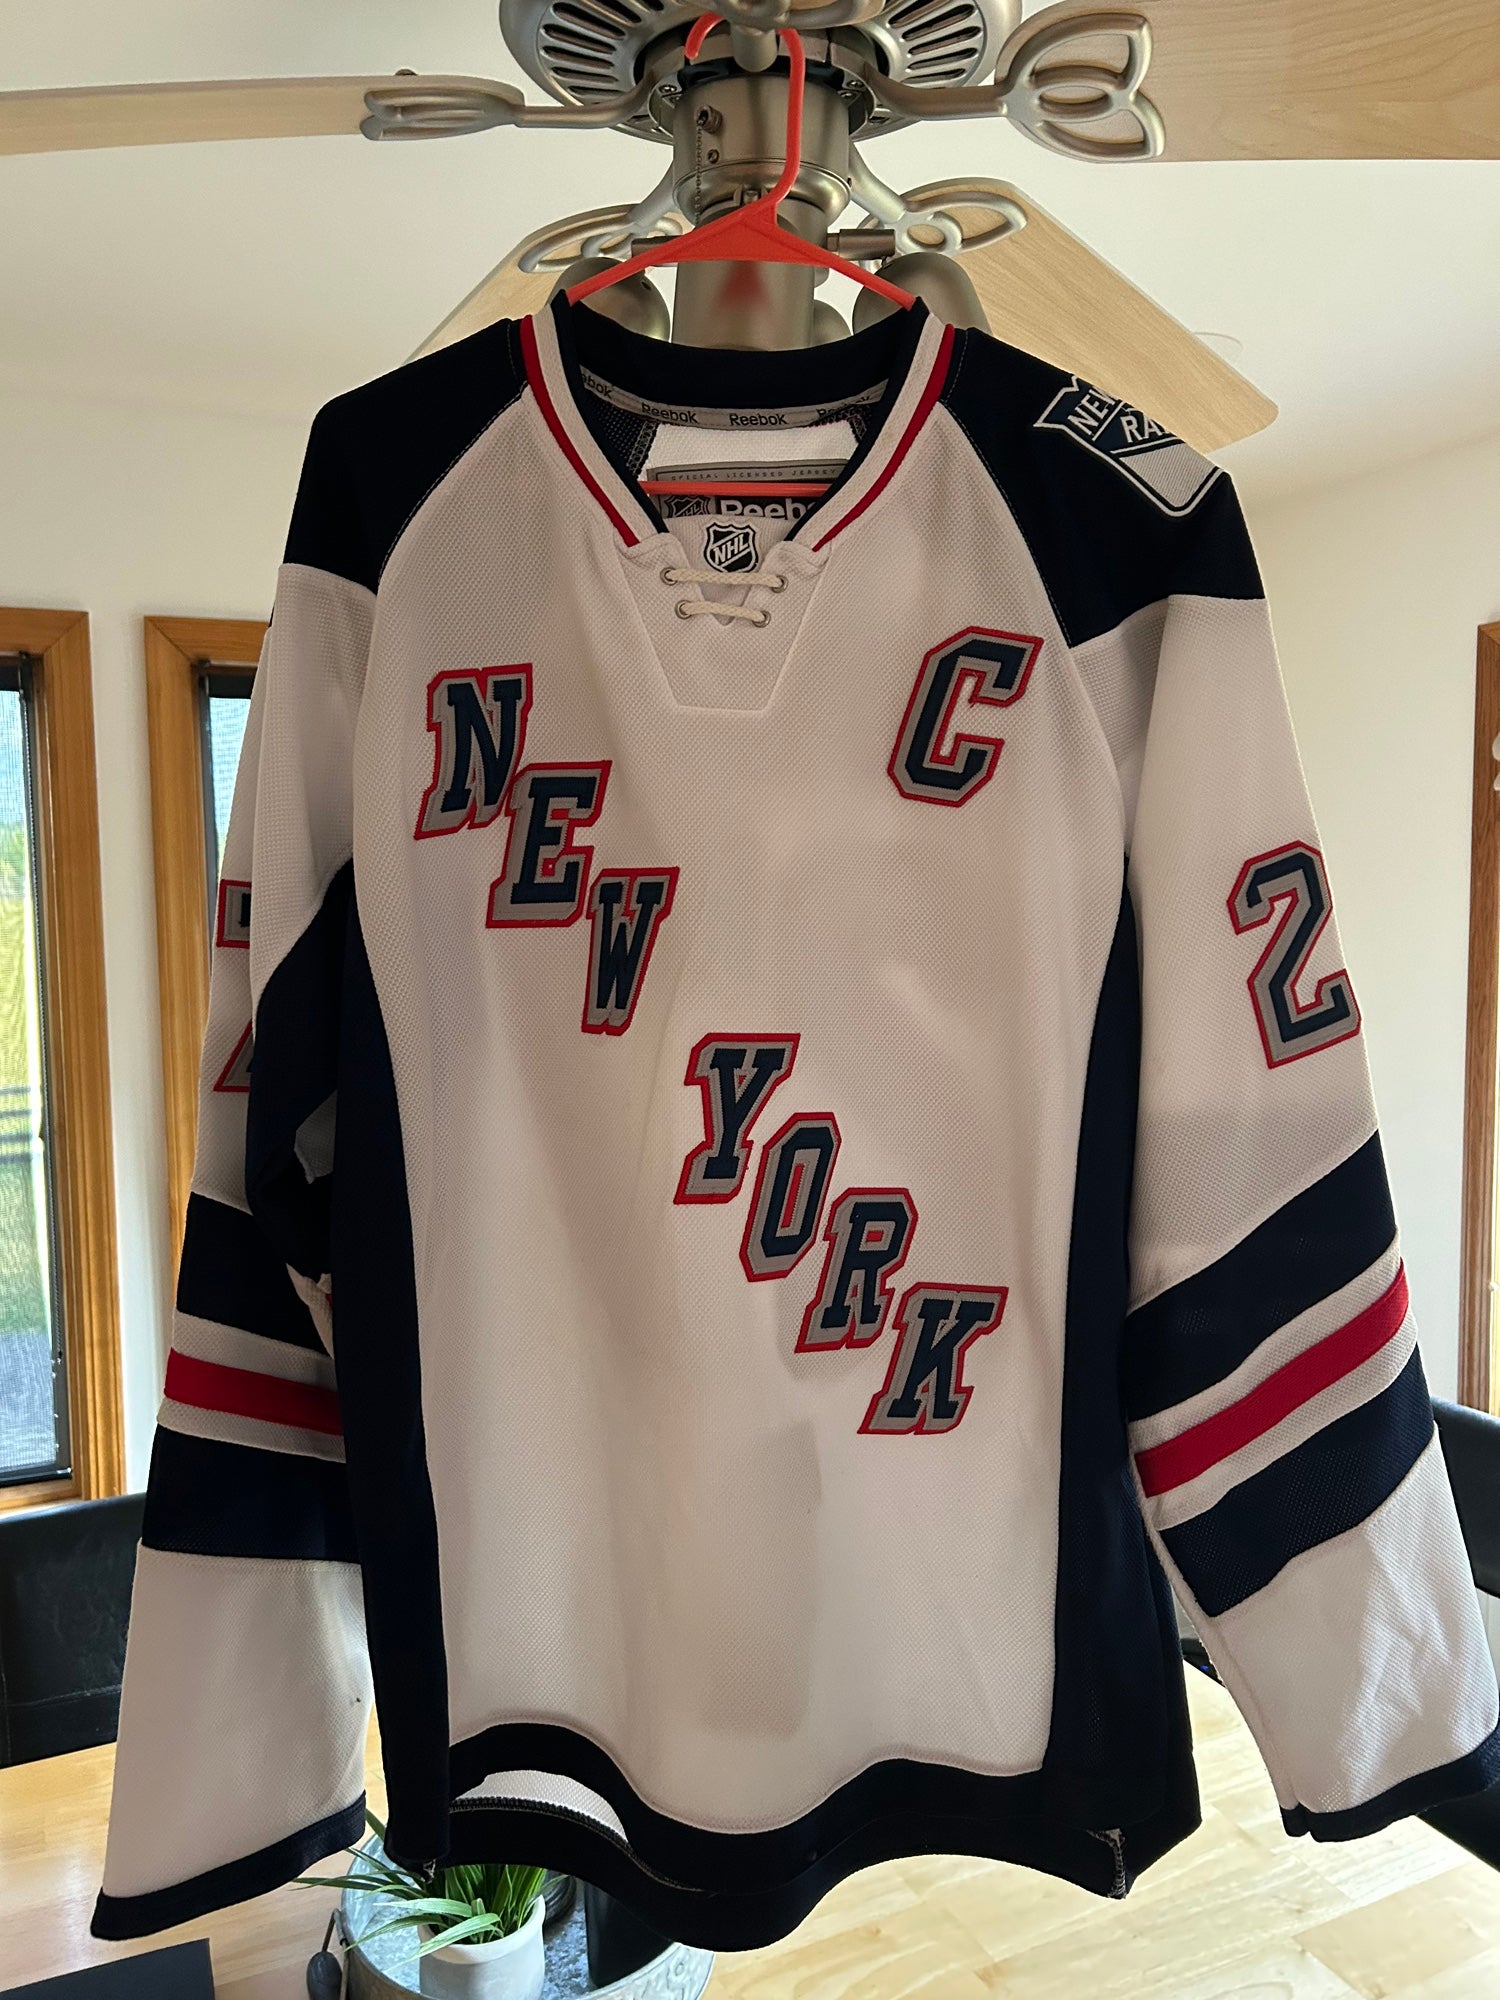 New York Rangers Team-Issued White Jersey from the 2014 NHL